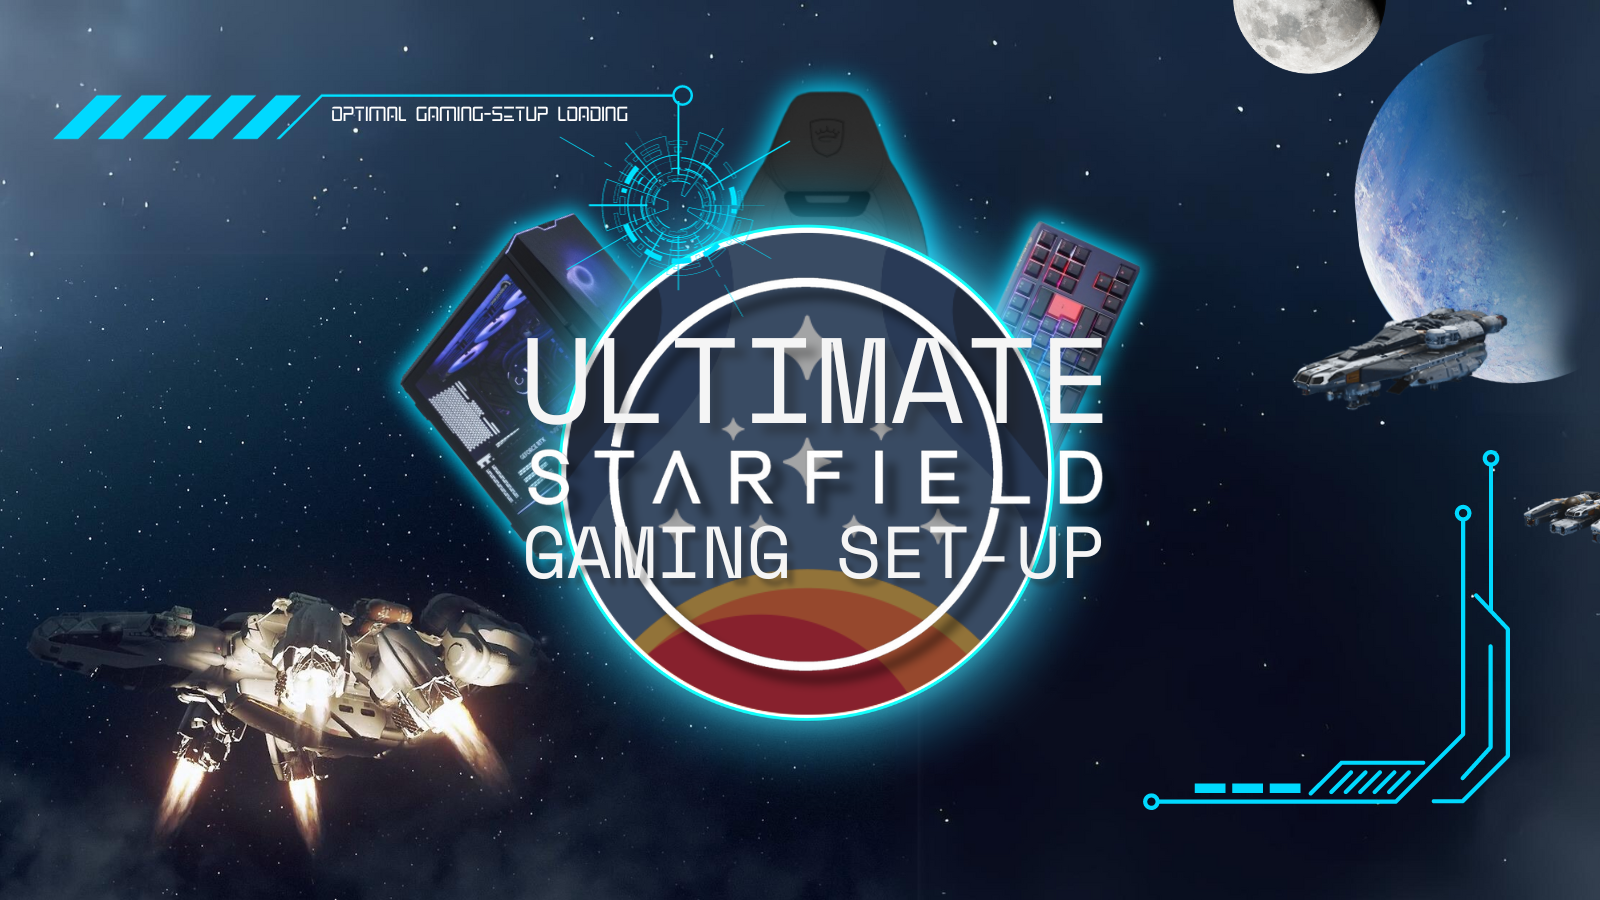 Best Starfield graphics settings for Nvidia RTX 3070 and RTX 3070 Ti